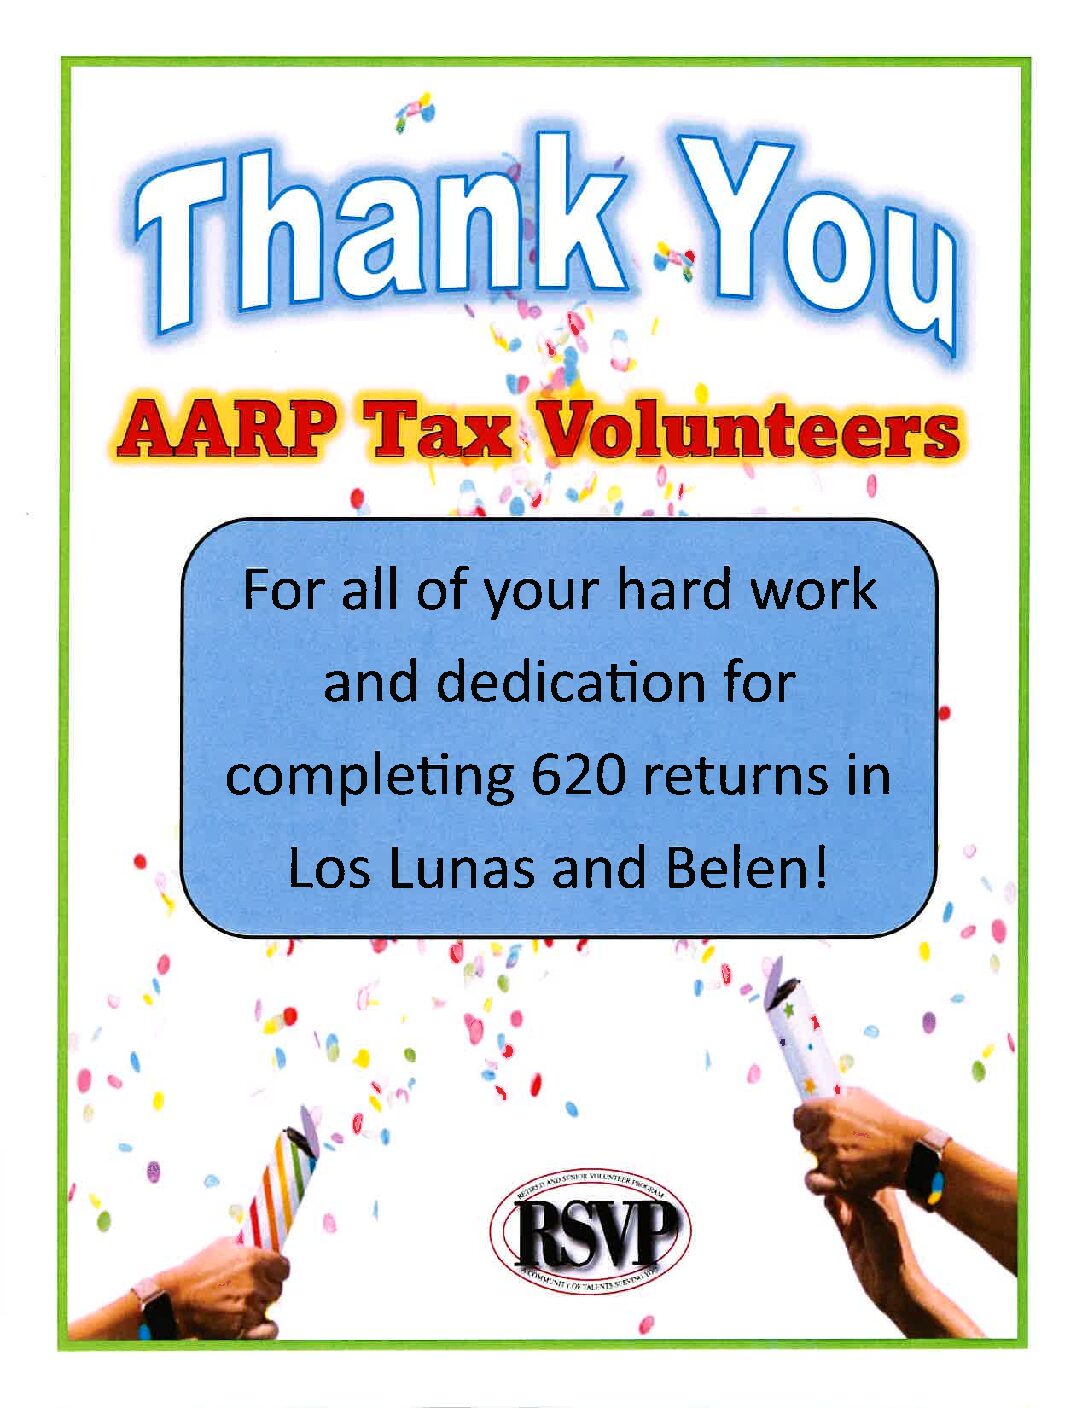 Featured image for “Thank you AARP Tax Volunteers!”